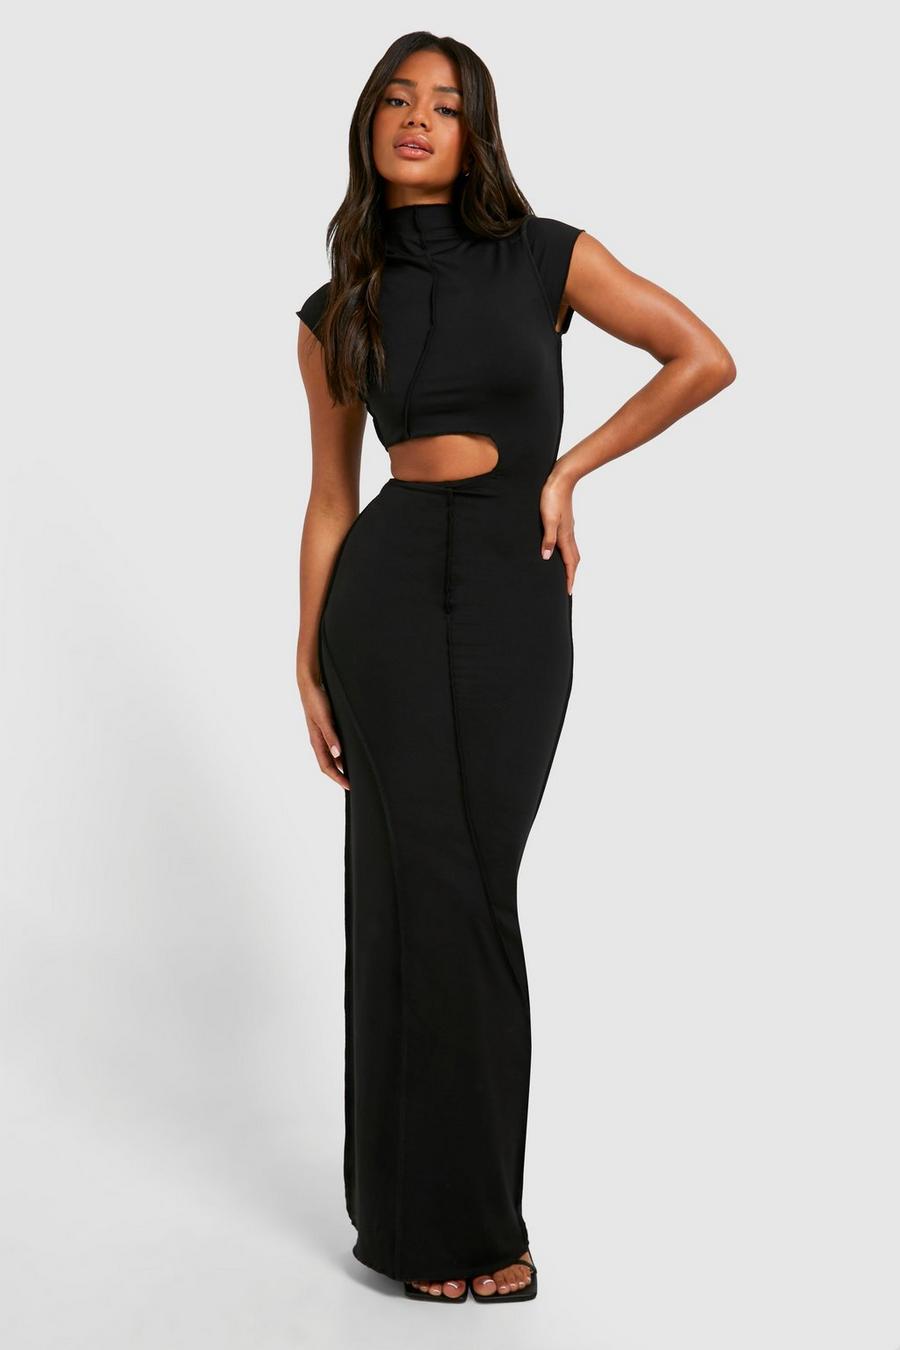 Black Exposed Seam Cut Out Maxi Dress  